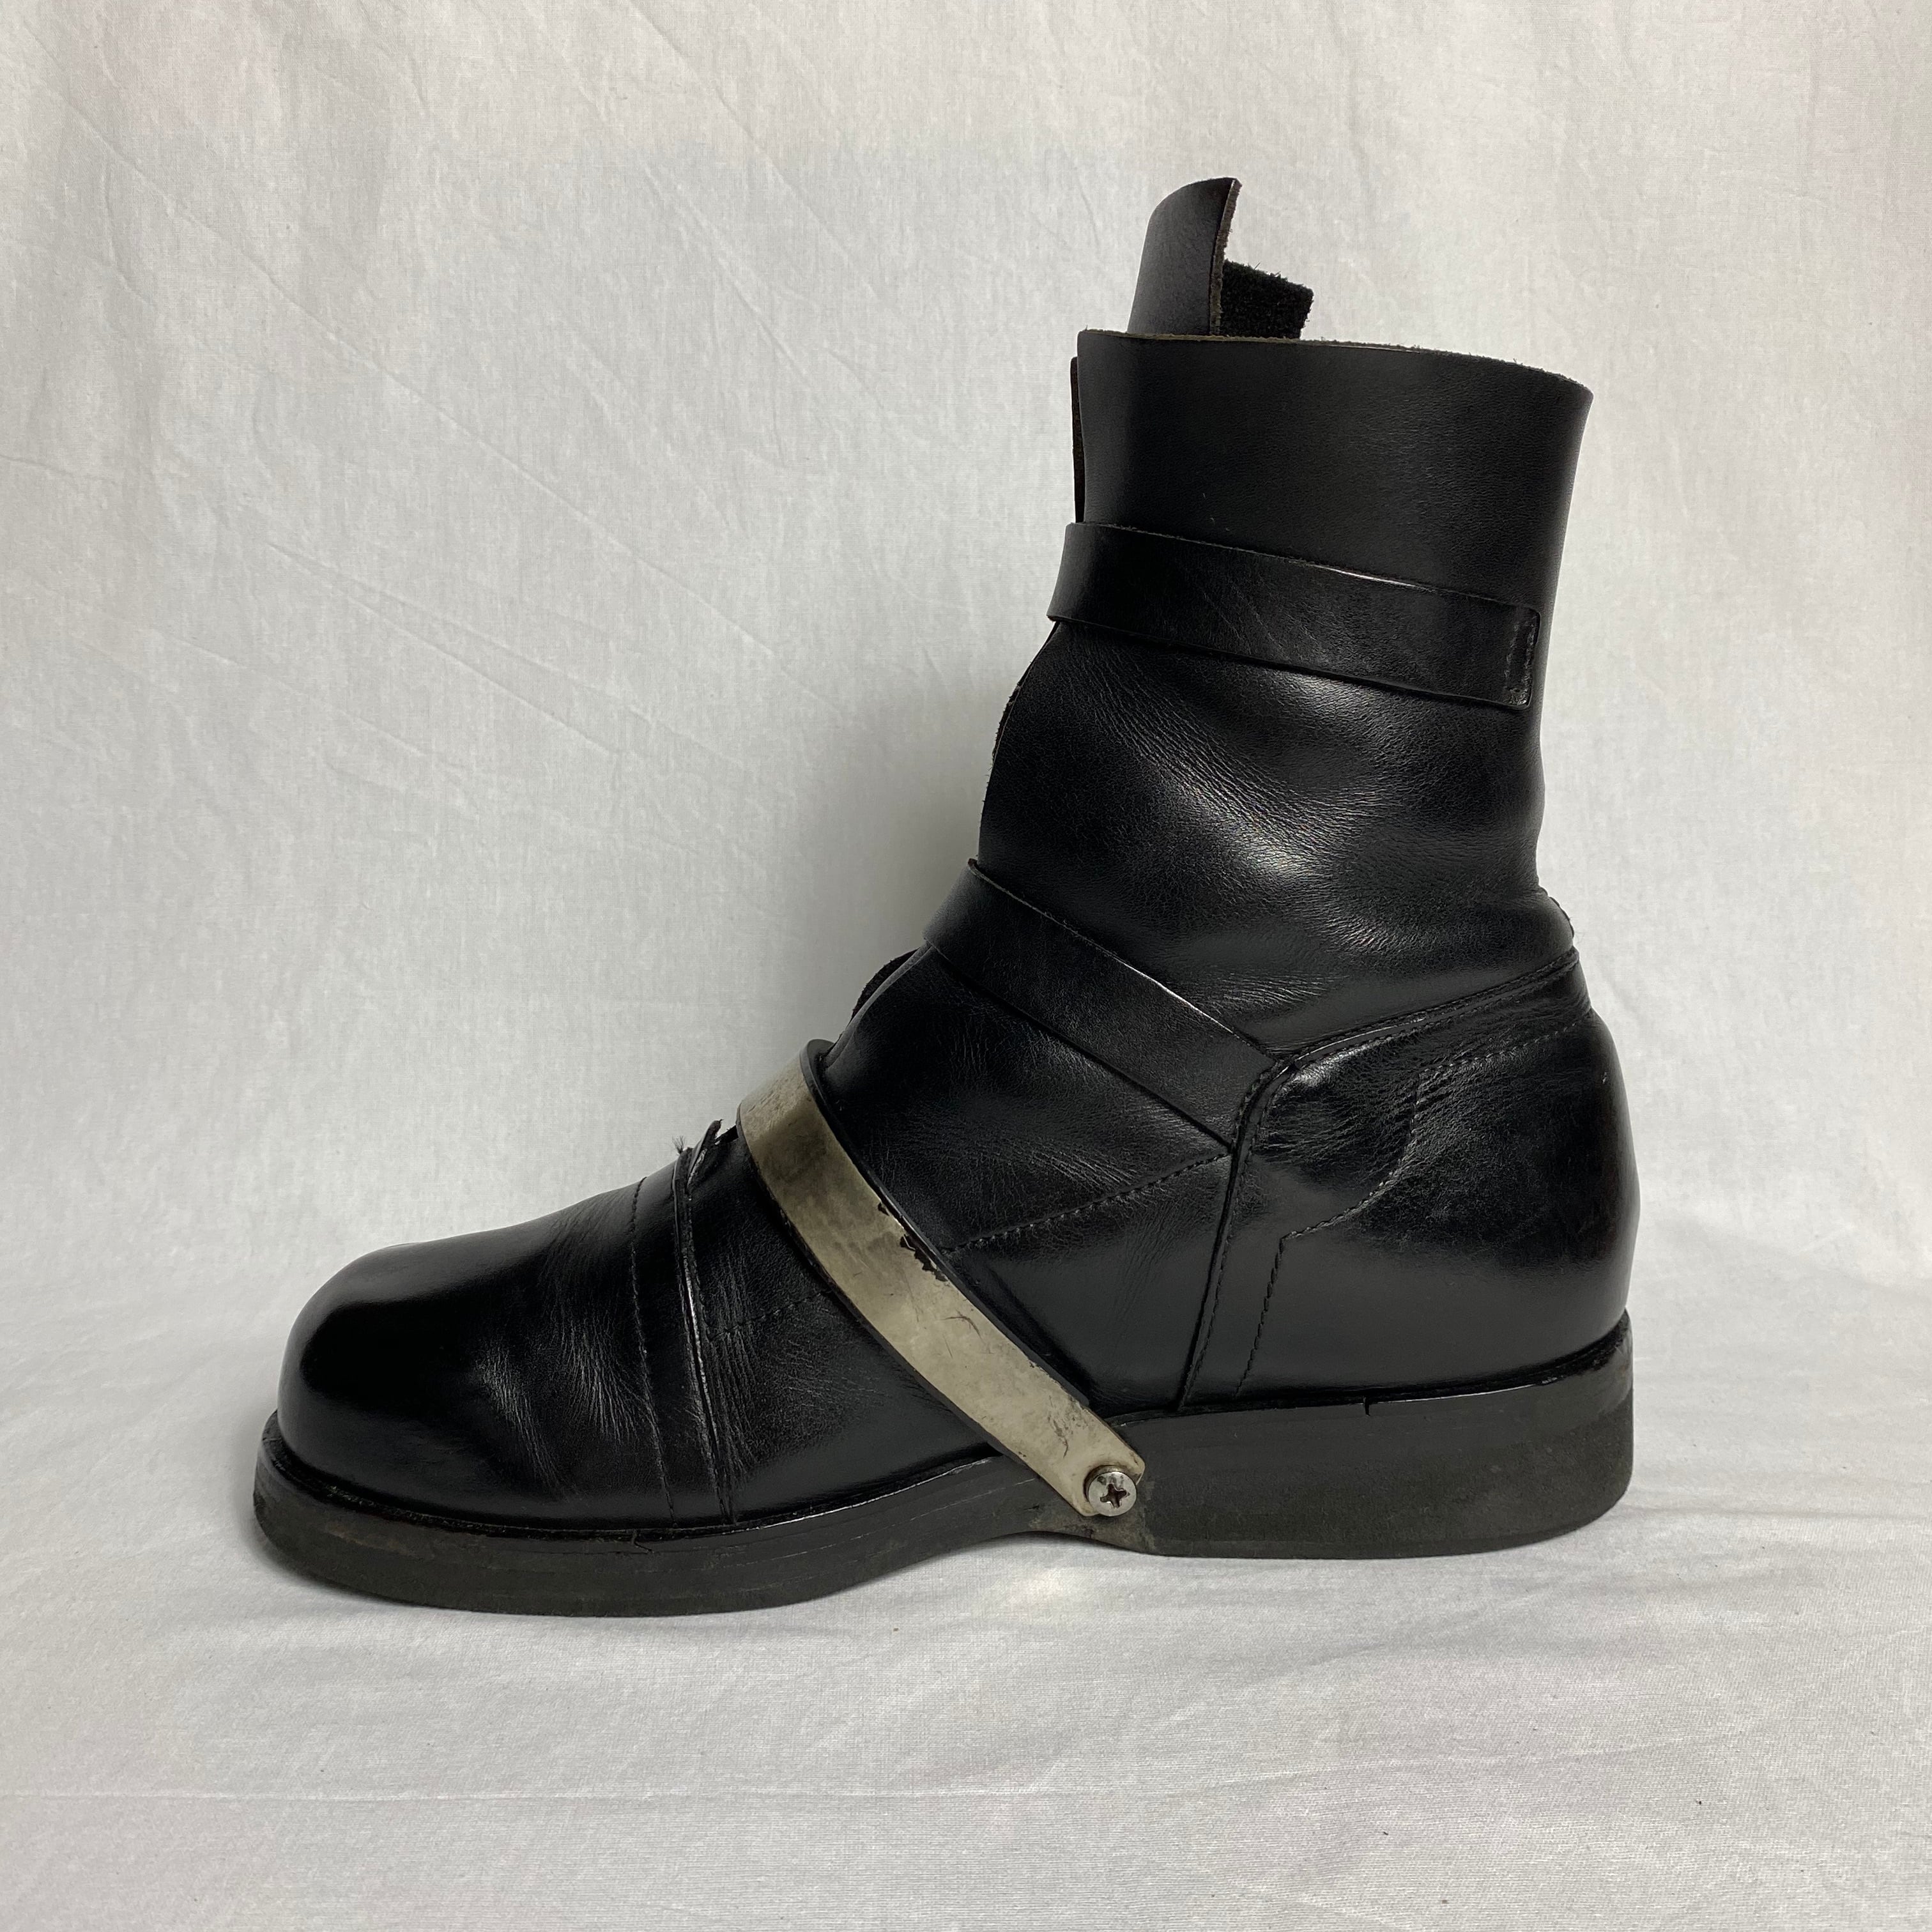 DIRK BIKKEMBERGS Leather boots ダークビッケンバーグ レザーブーツ   bee